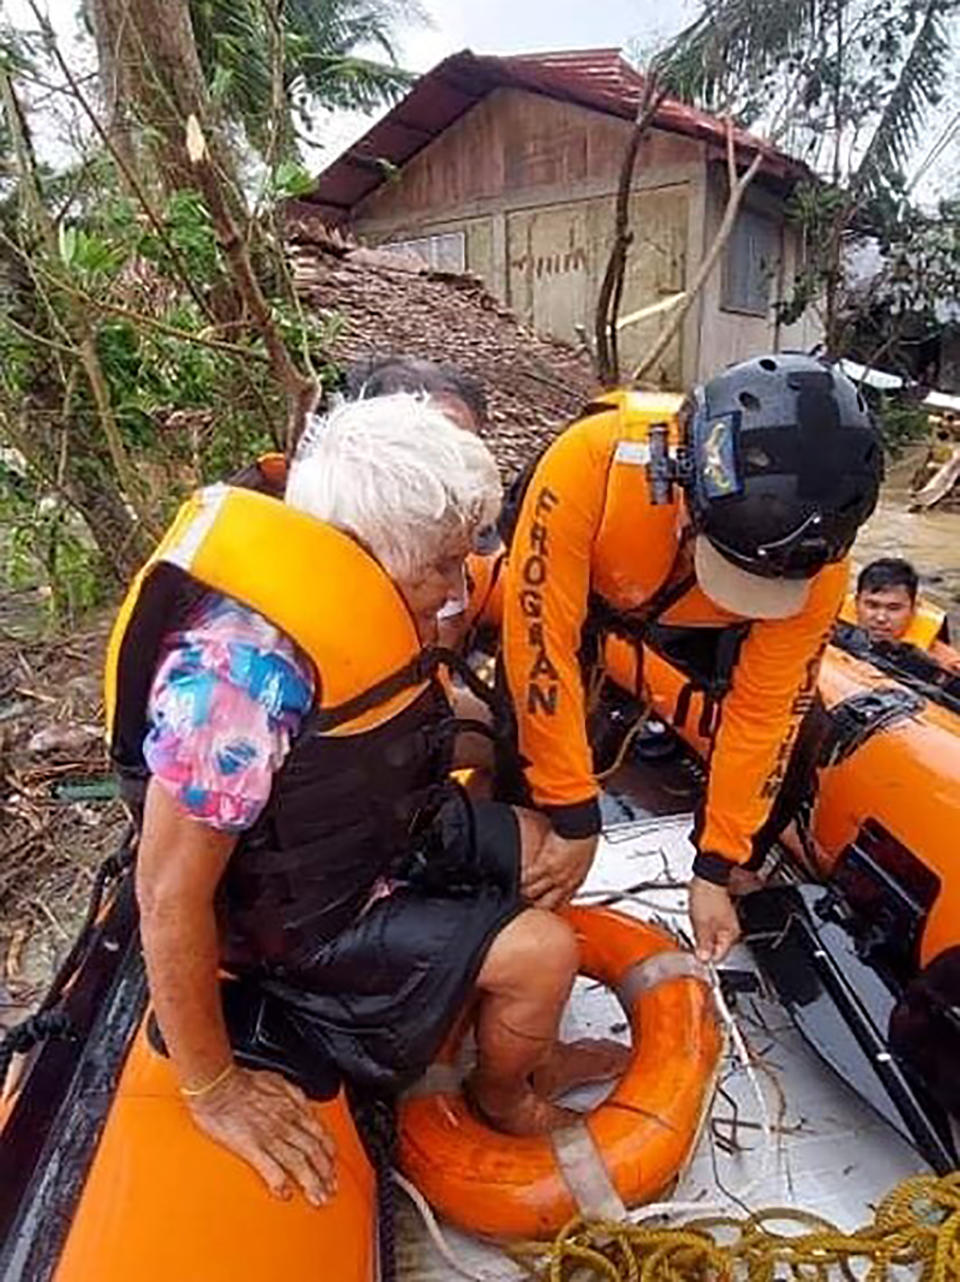 In this photo provided by the Philippine Coast Guard, rescuers assist residents who were trapped in their homes after floodwaters caused by Typhoon Rai inundated their village in Negros Occidental, central Philippines on Friday, Dec. 17, 2021. A strong typhoon engulfed villages in floods that trapped residents on roofs, toppled trees and knocked out power in southern and central island provinces, where more than 300,000 villagers had fled to safety before the onslaught, officials said. (Philippine Coast Guard via AP)